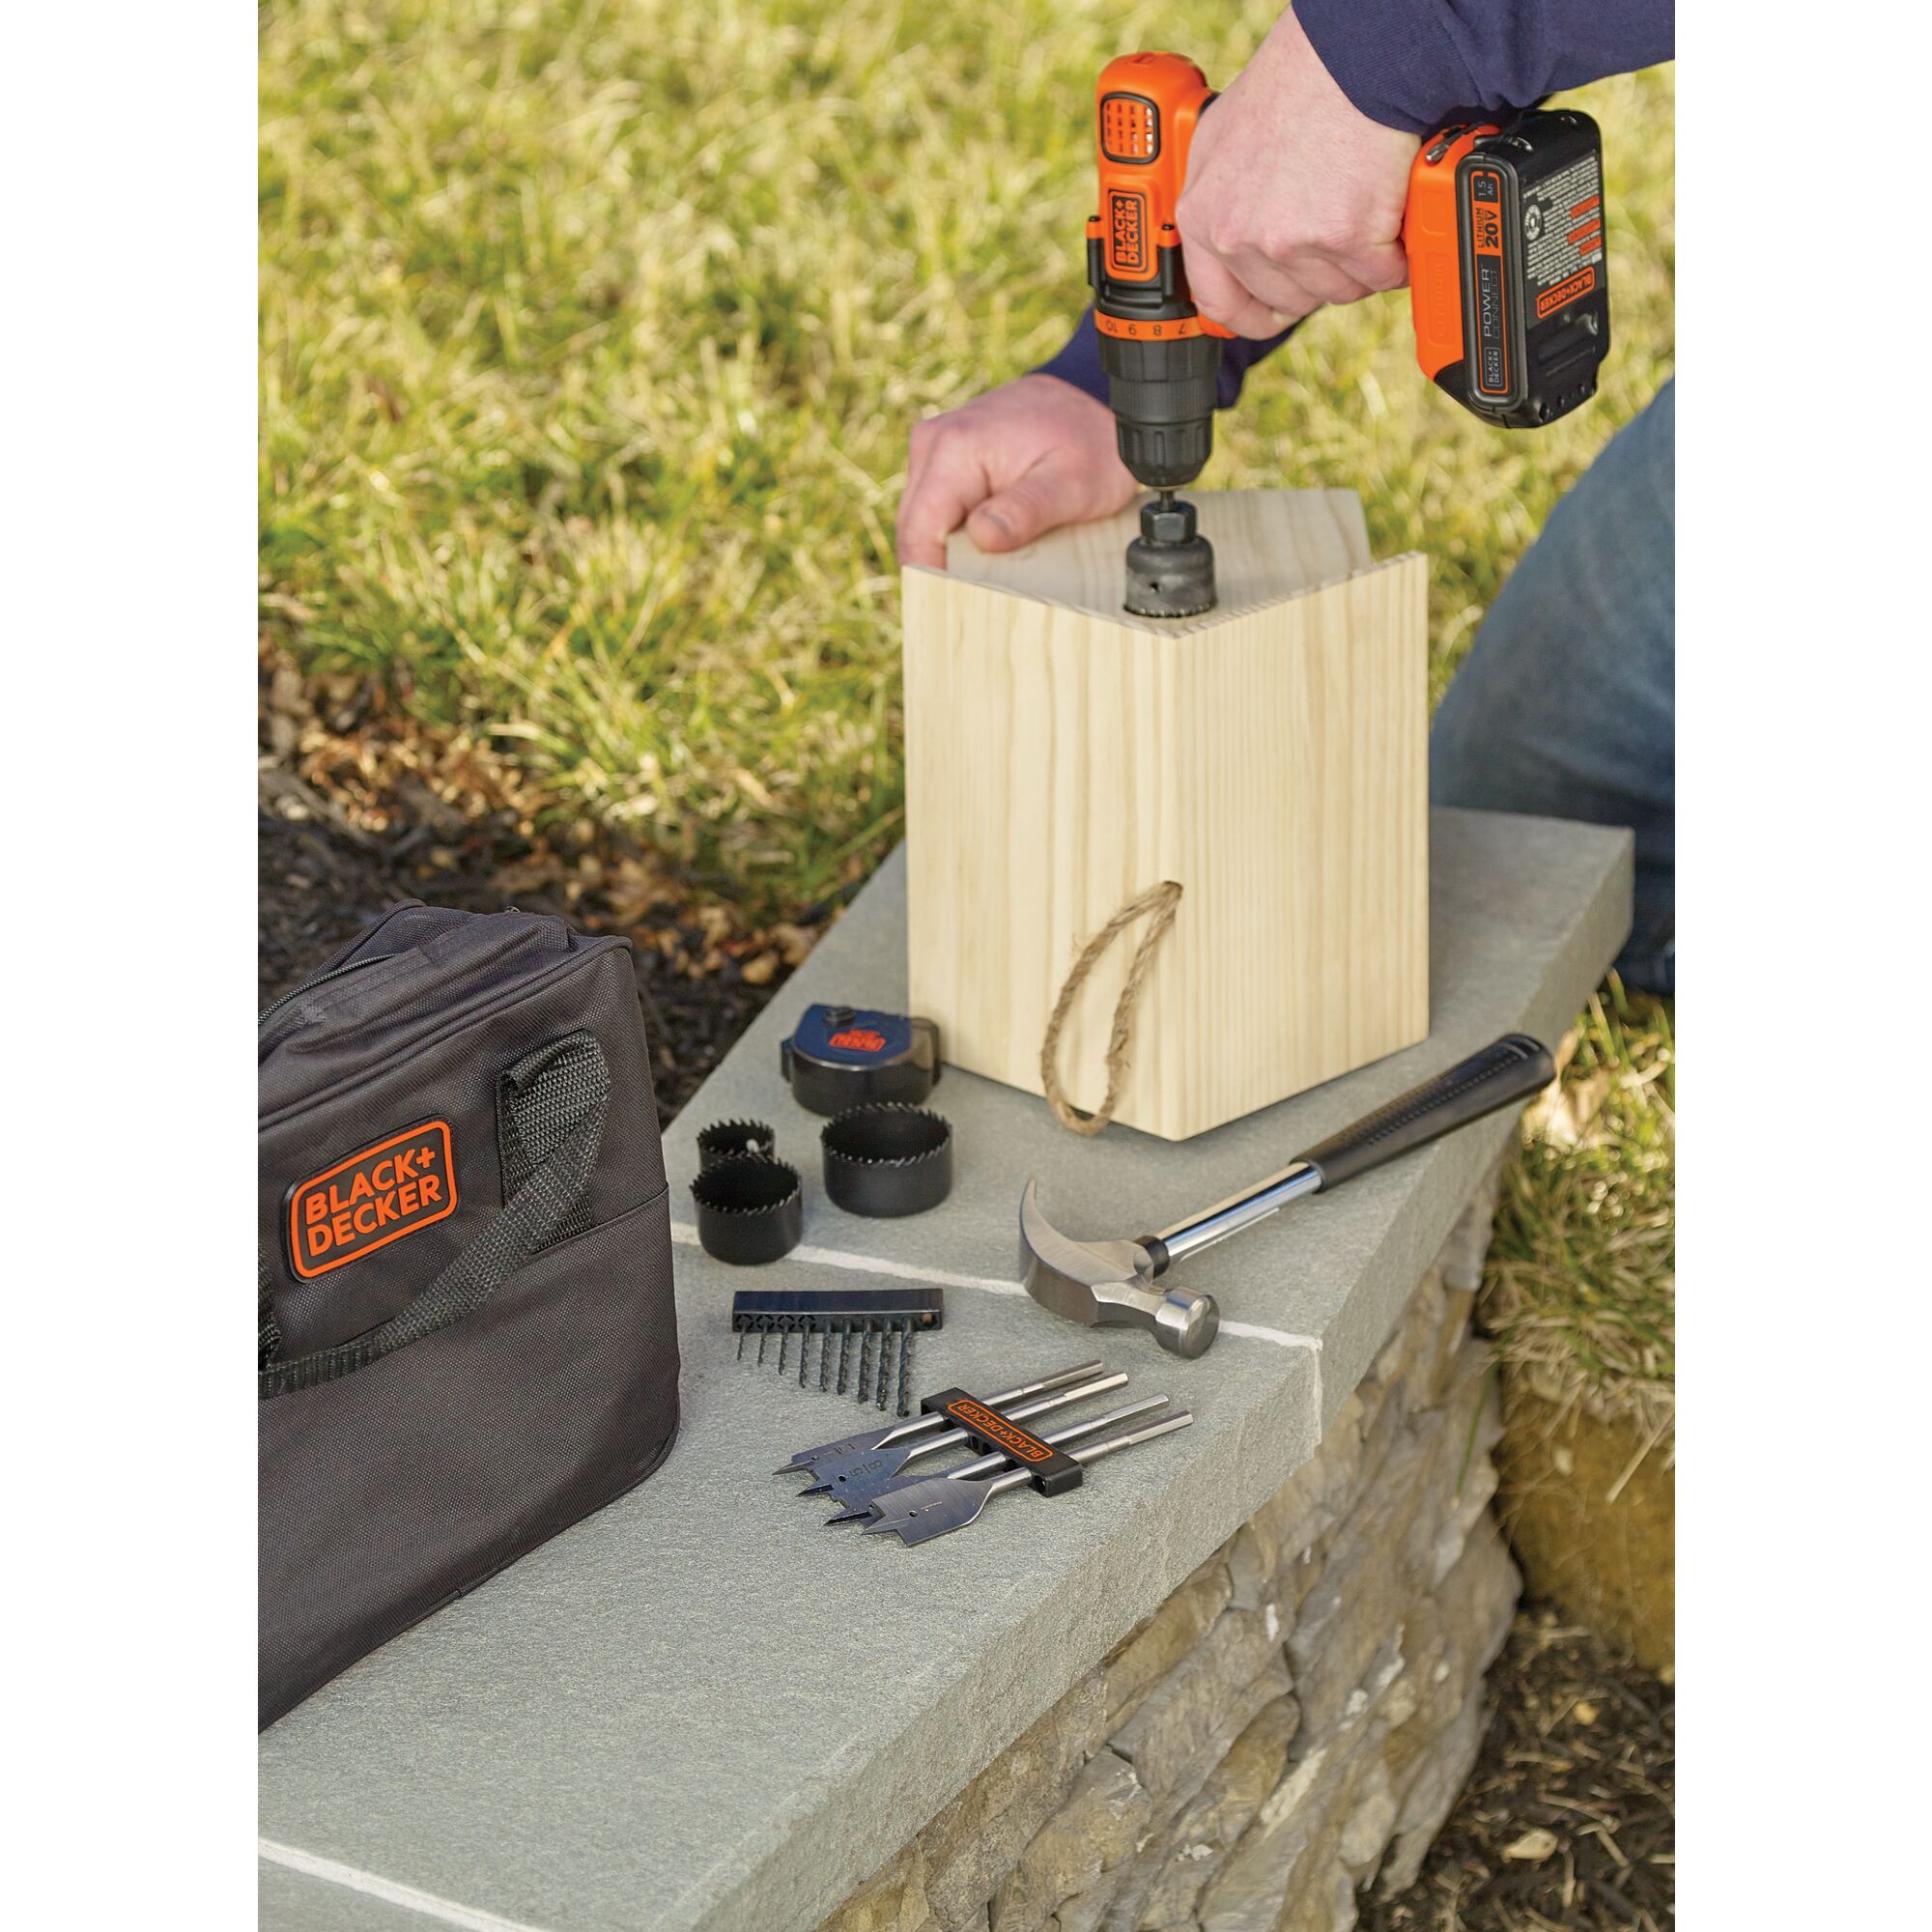 Lithium Ion Drill Driver plus 68 Piece Project Kit being used to drill hole in wooden bird house outdoors.